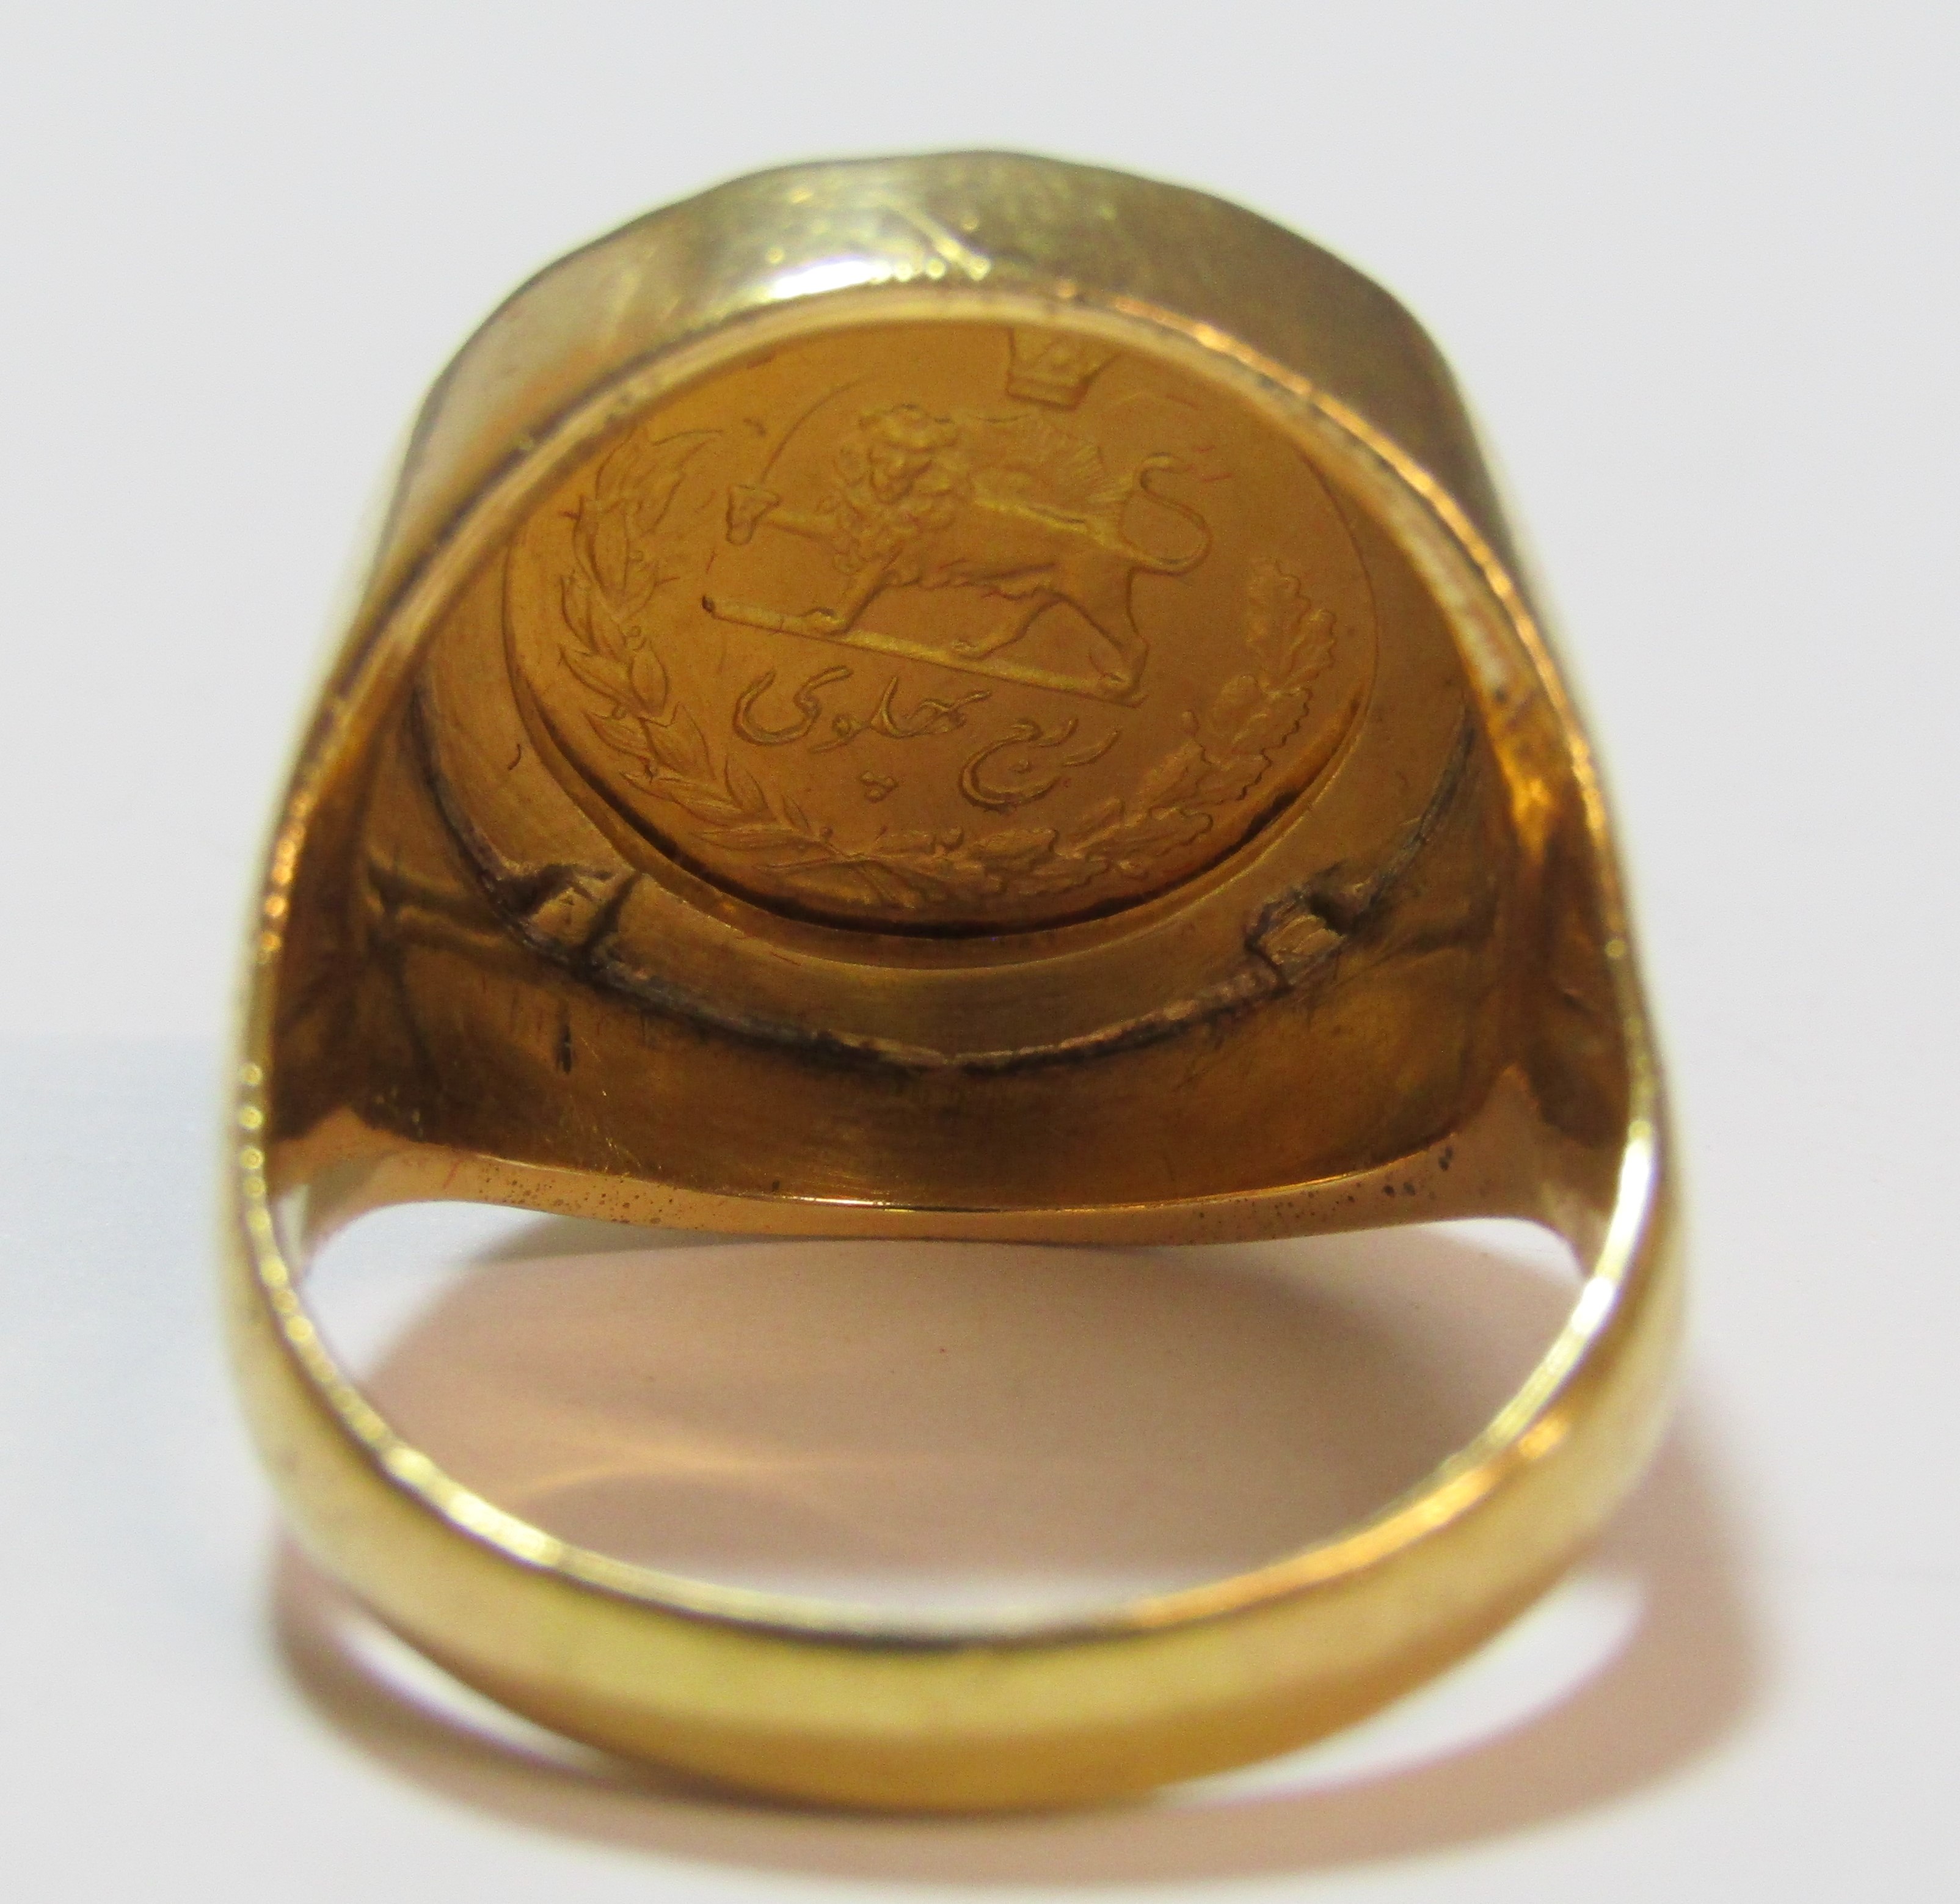 Tested as 9ct gold ring mounted with 22ct Phalavi Mohammad Reza Shah Iran gold quarter - ring size N - Image 3 of 6